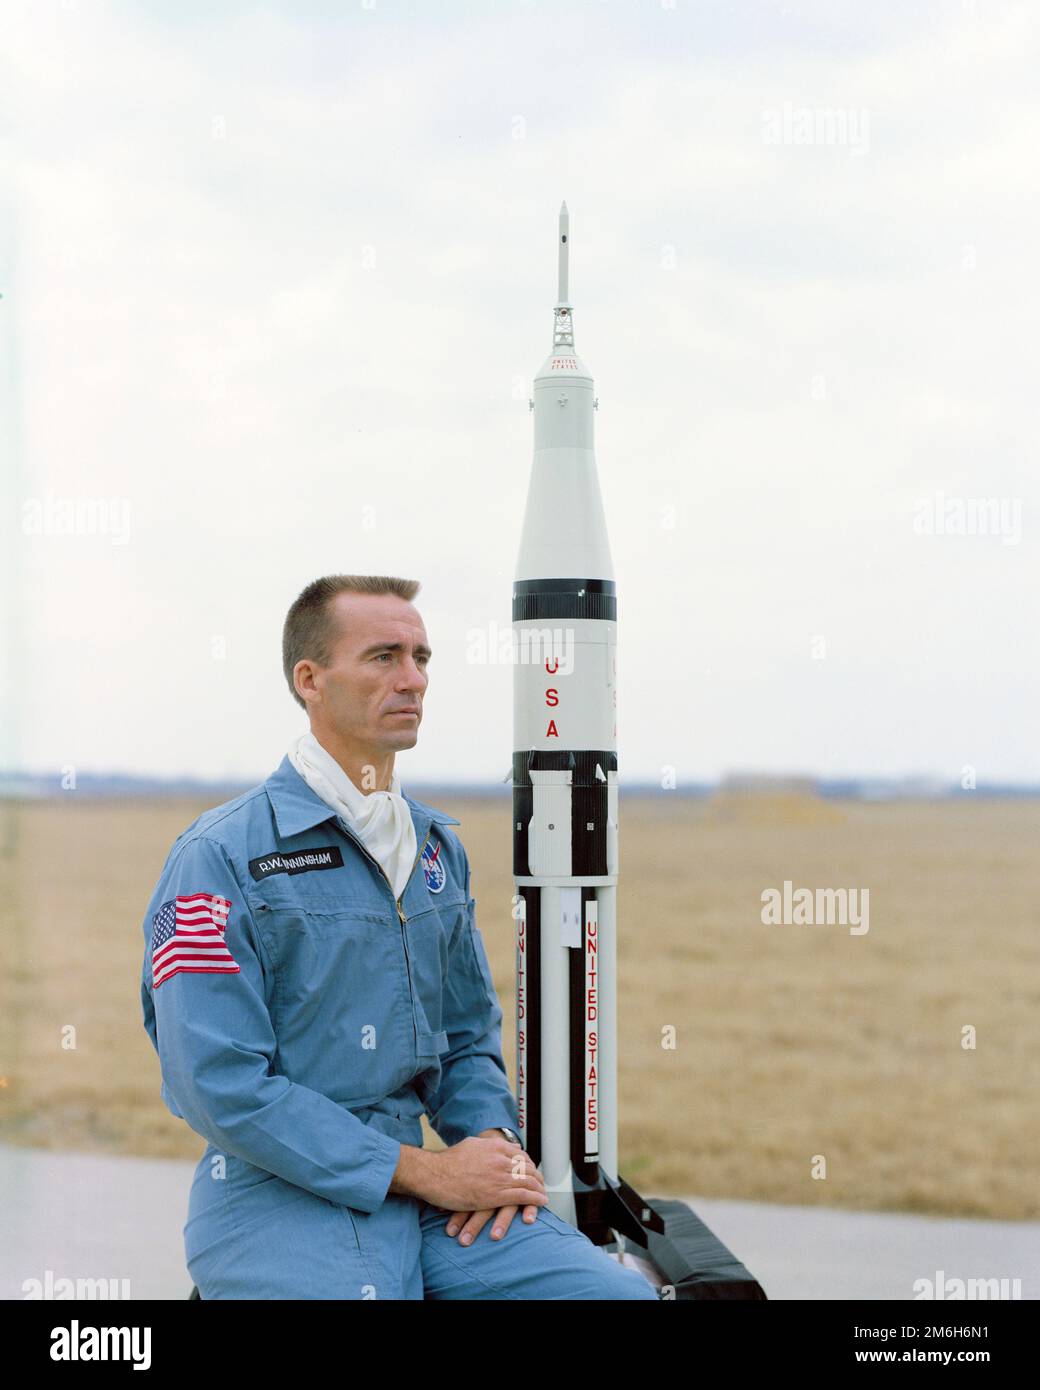 Cape Canaveral, United States. 04 January, 2023. NASA astronaut Walter Cunningham, lunar module pilot for the Apollo 7 mission poses with a model of the Apollo 7 Saturn rocket ship at the Kennedy Space Center, February 13, 1968 in Cape Canaveral, Florida. Cunningham died January 4, 2023 at 90-years-old, the last surviving member of the NASA Apollo 7 mission. Stock Photo